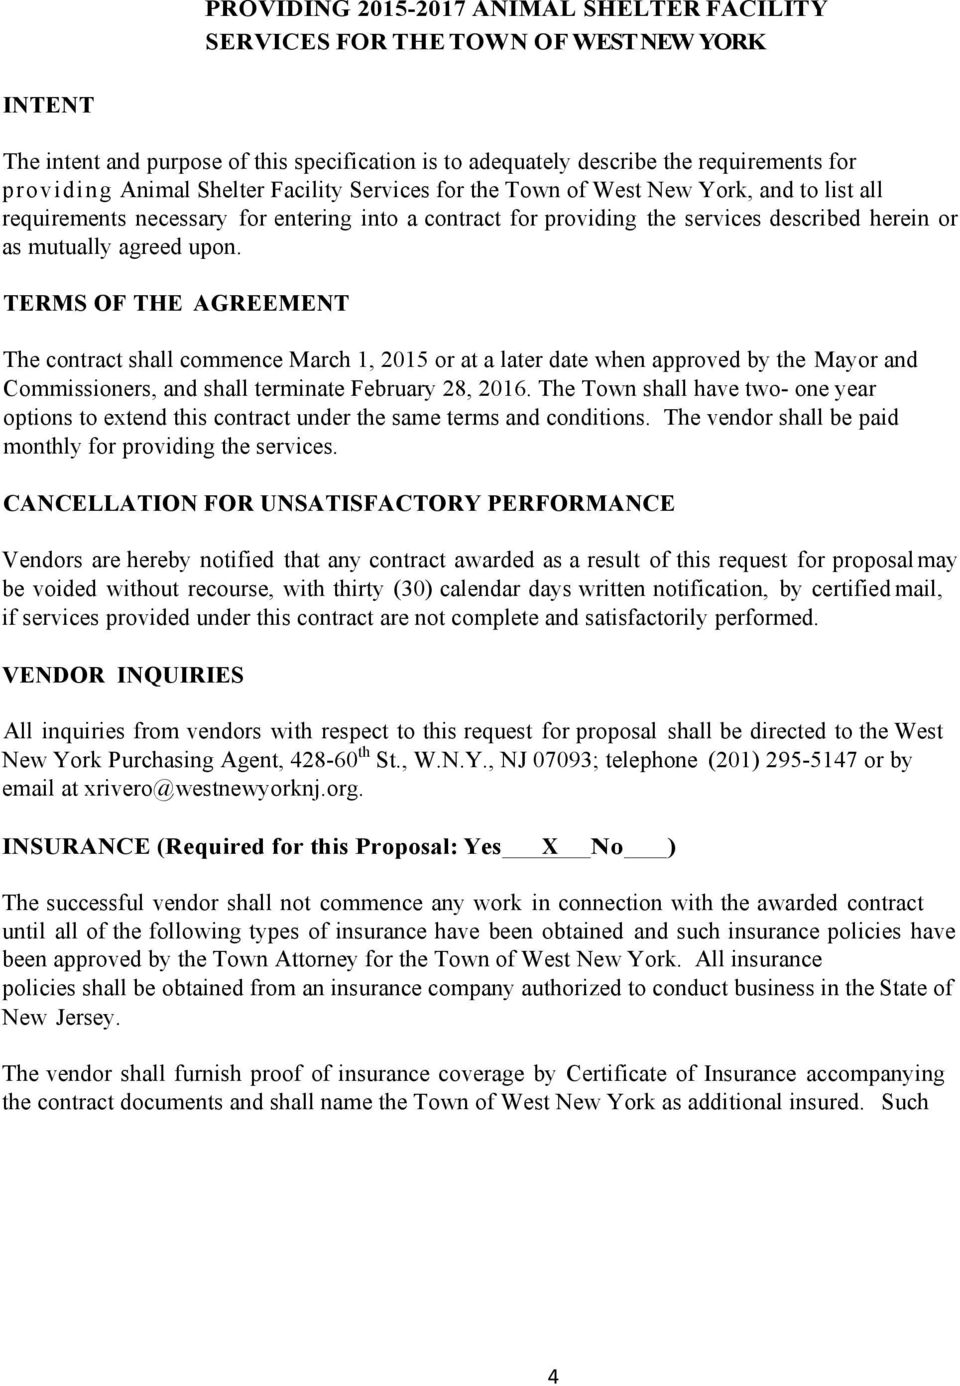 TERMS OF THE AGREEMENT The contract shall commence March 1, 2015 or at a later date when approved by the Mayor and Commissioners, and shall terminate February 28, 2016.